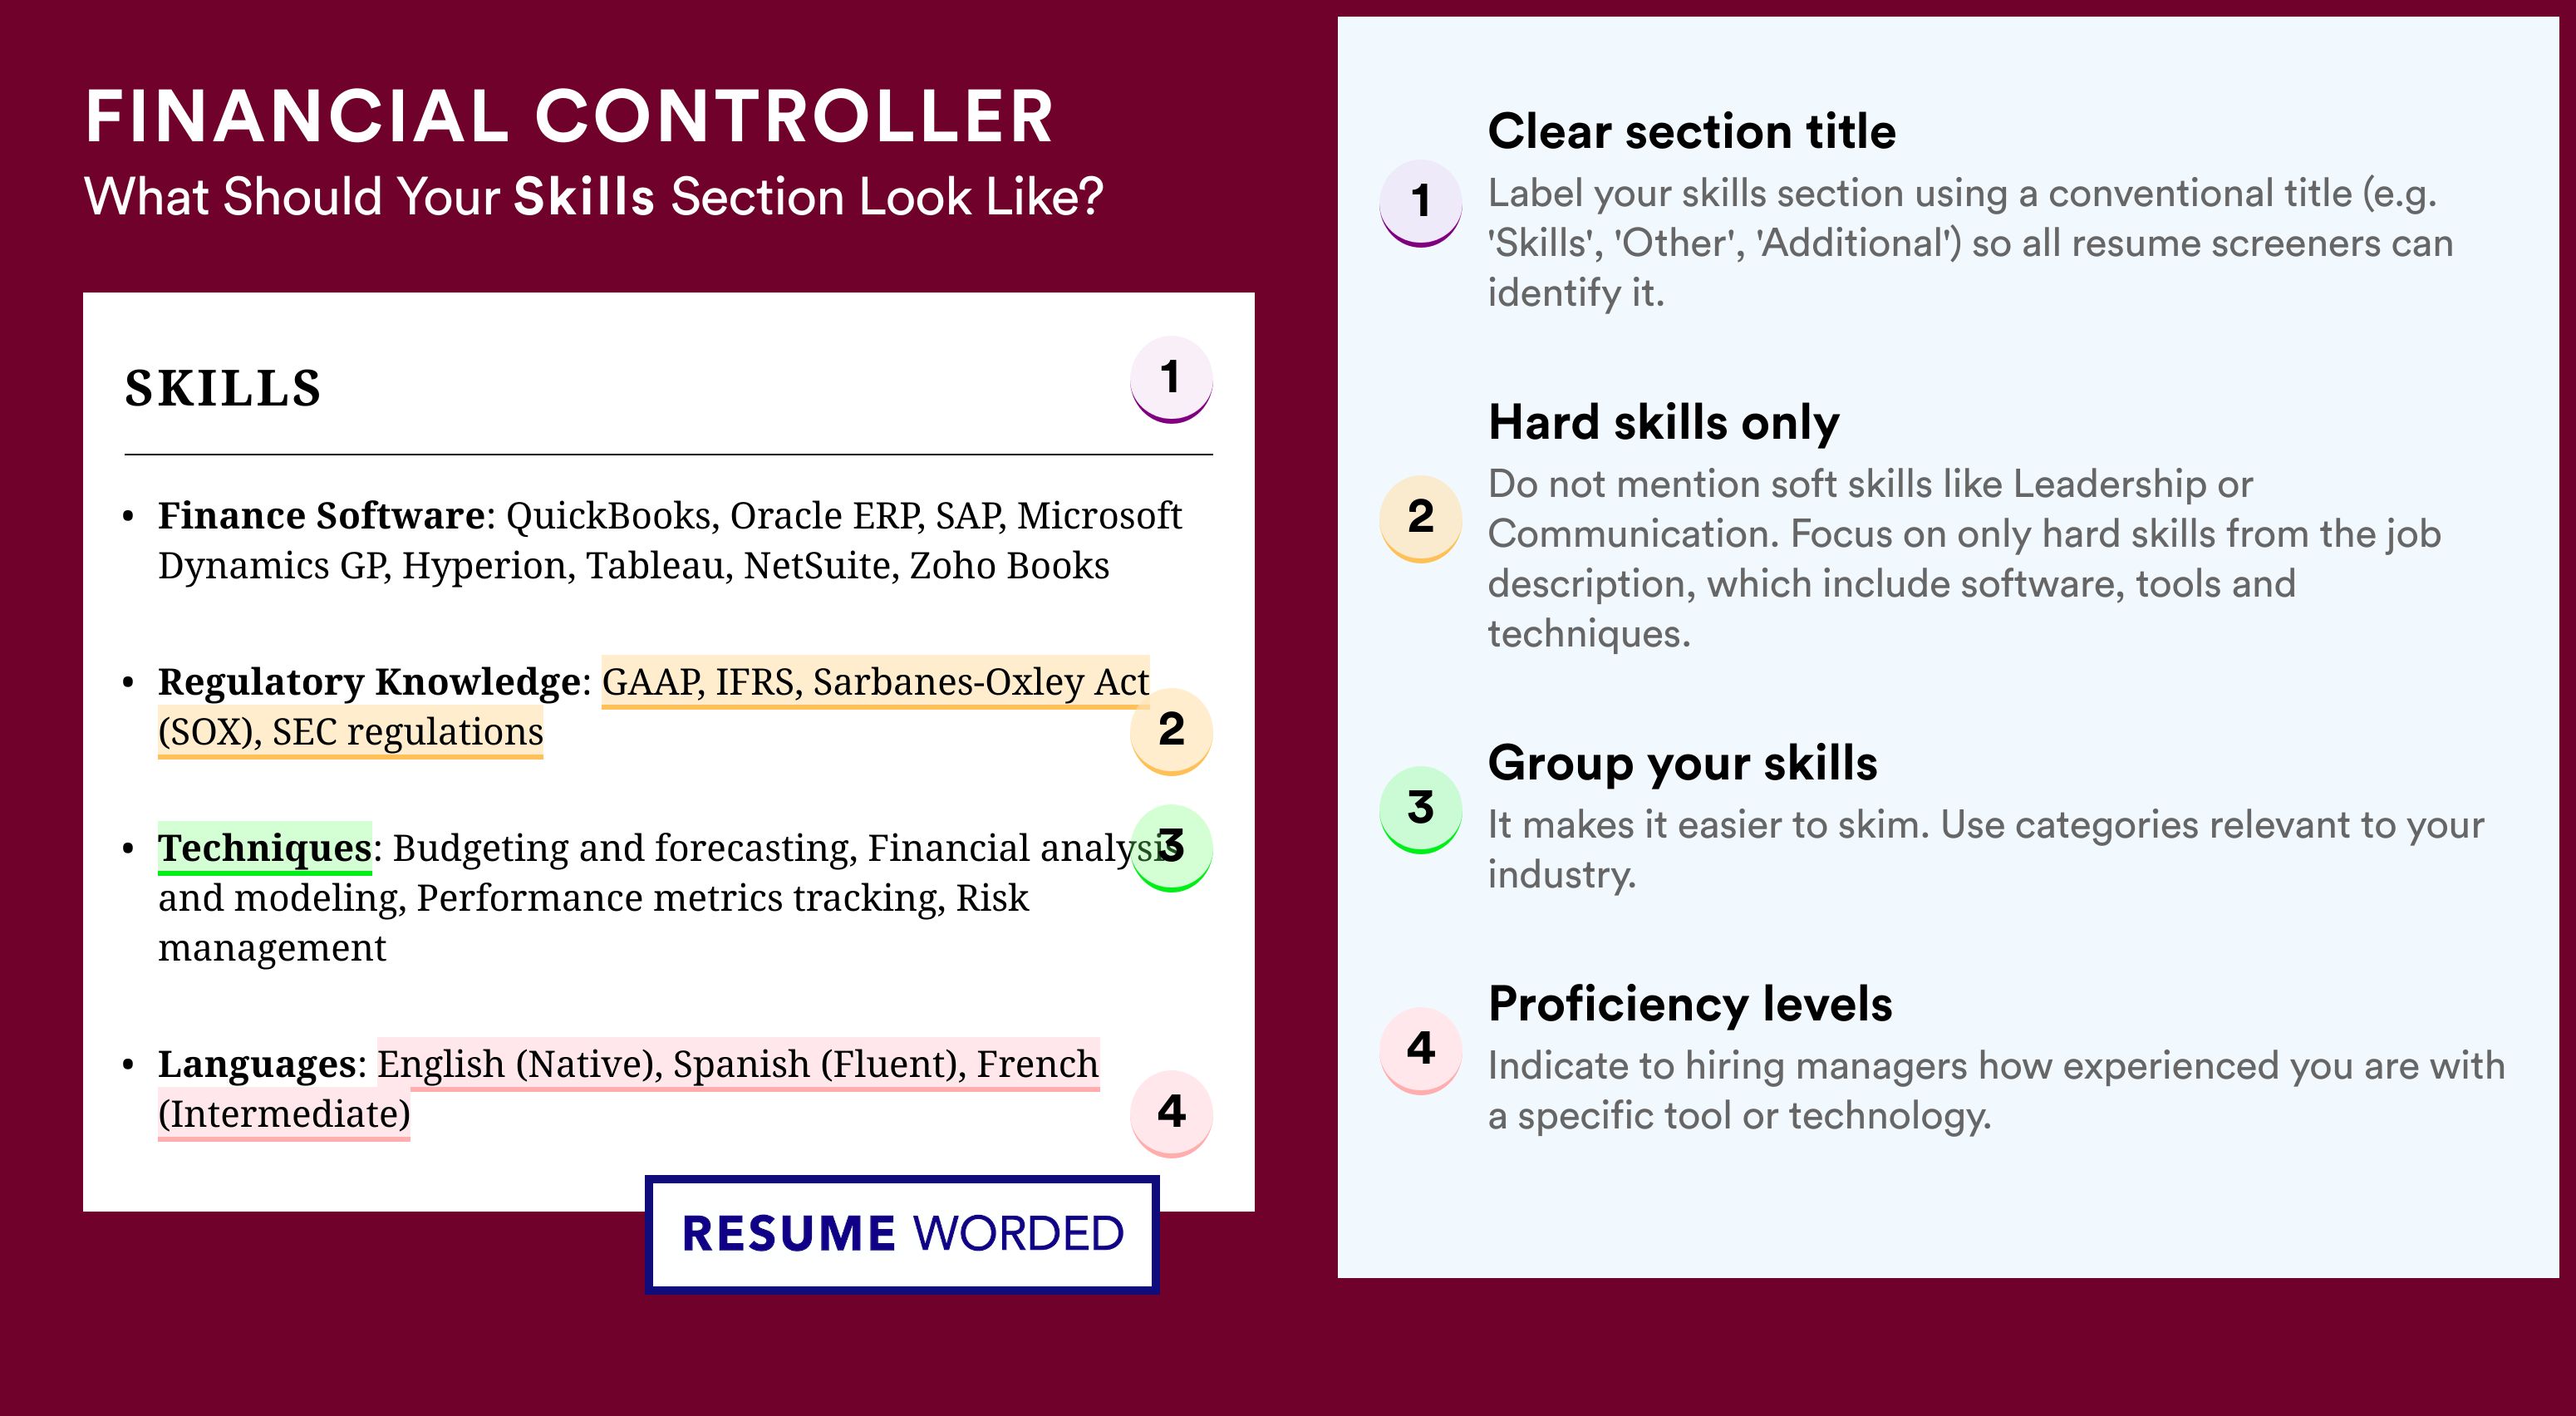 How To Write Your Skills Section - Financial Controller Roles